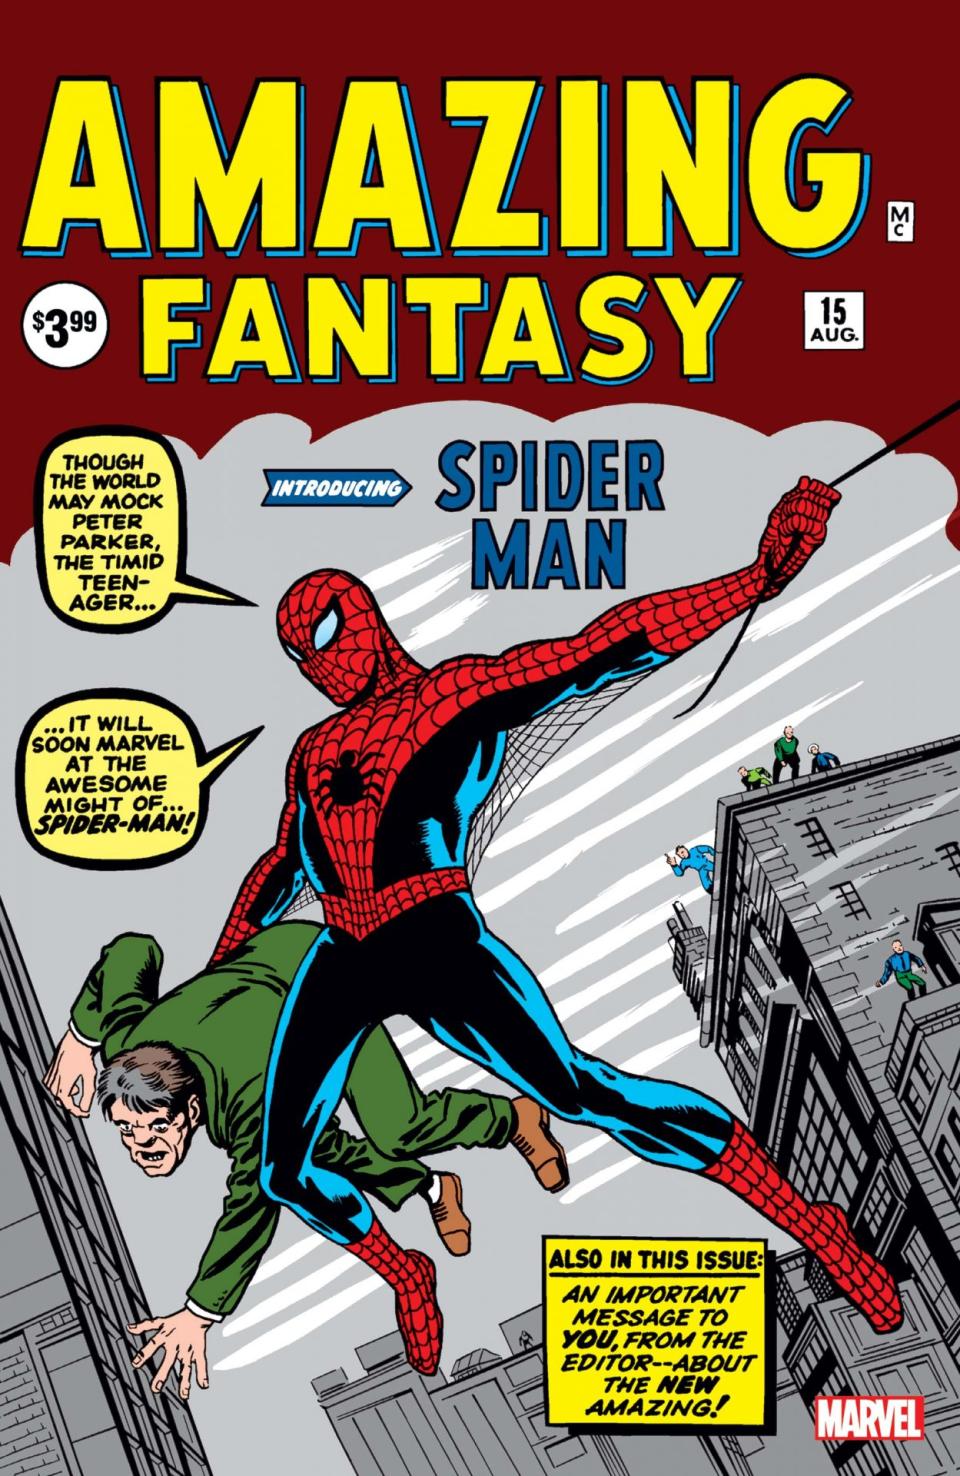 Amazing Fantasy #15, the first appearance of Spider-Man